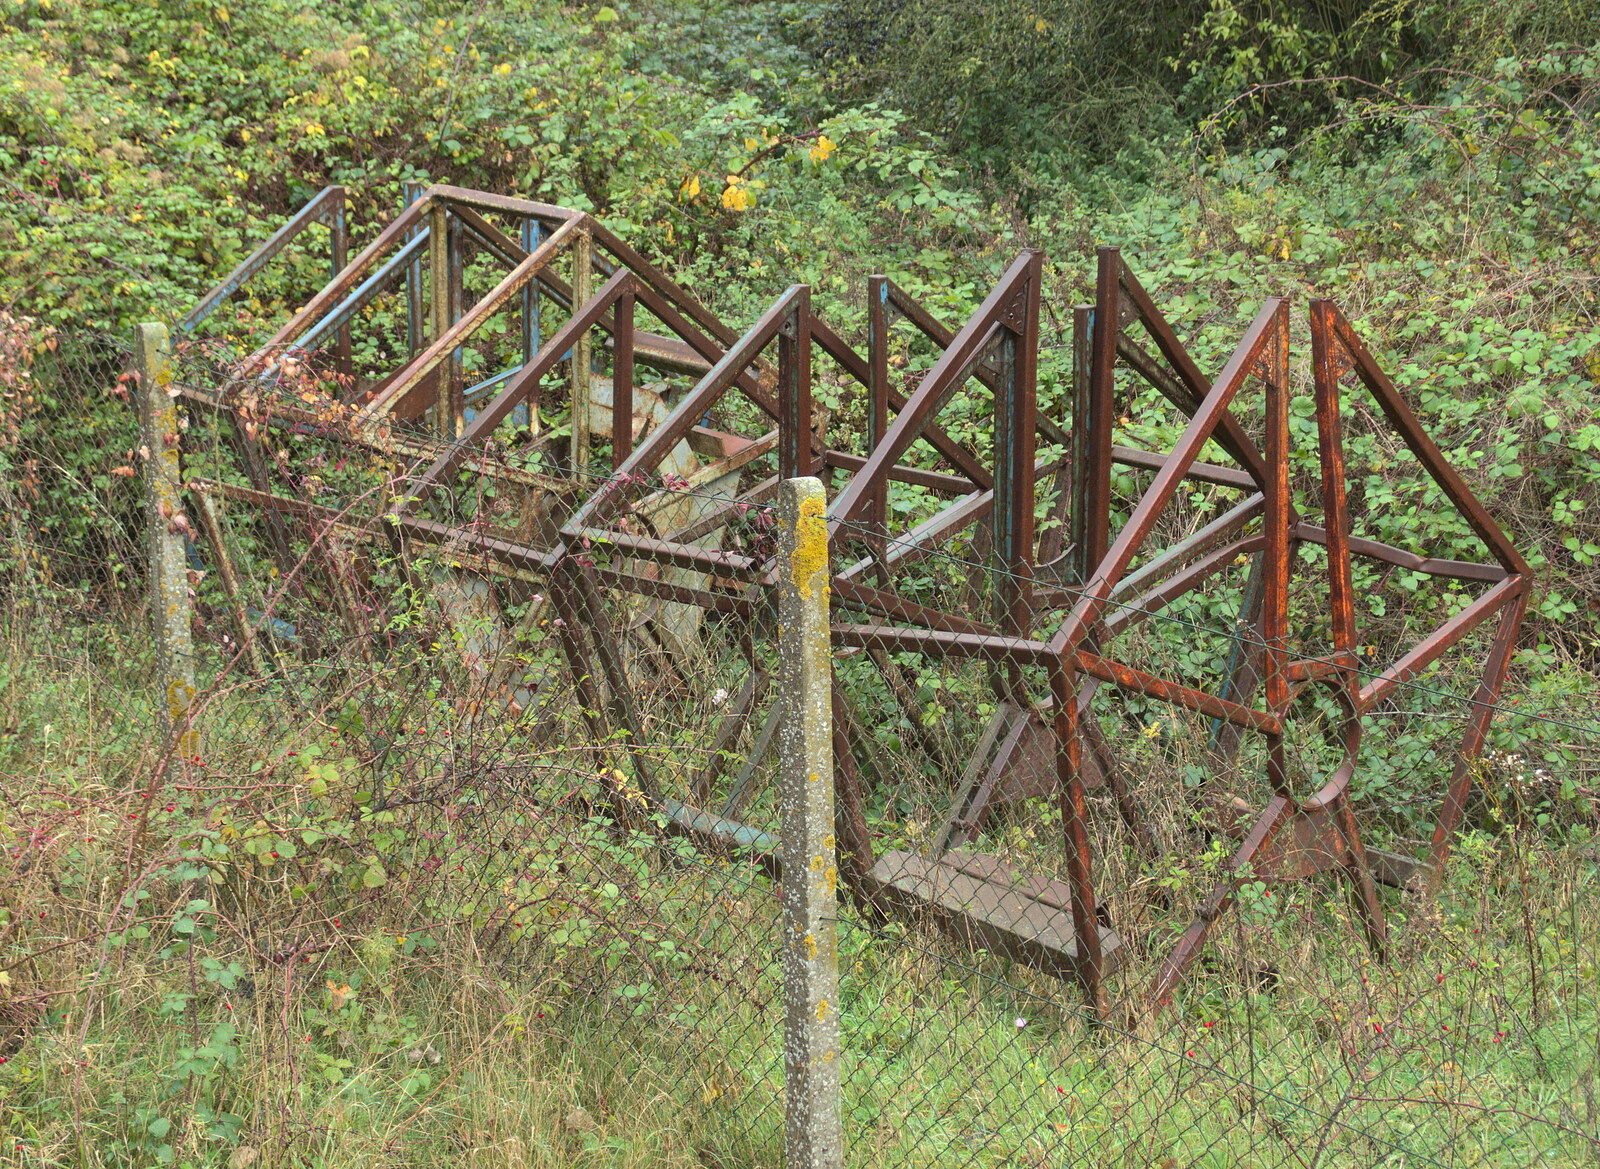 Some sort of derelict ironwork from (Very) Long Train (Not) Running, Stowmarket, Suffolk - 21st October 2014